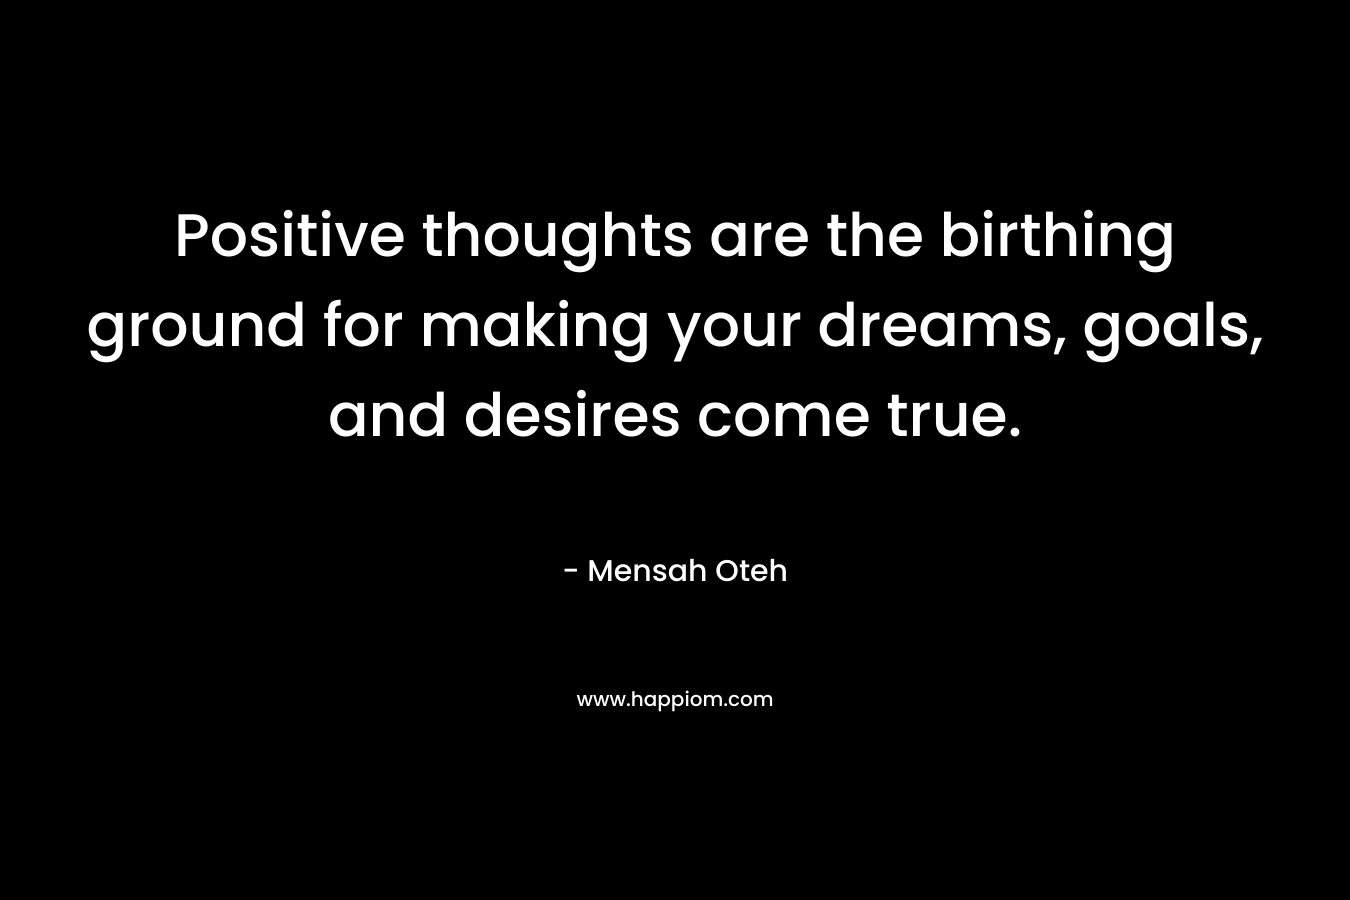 Positive thoughts are the birthing ground for making your dreams, goals, and desires come true.